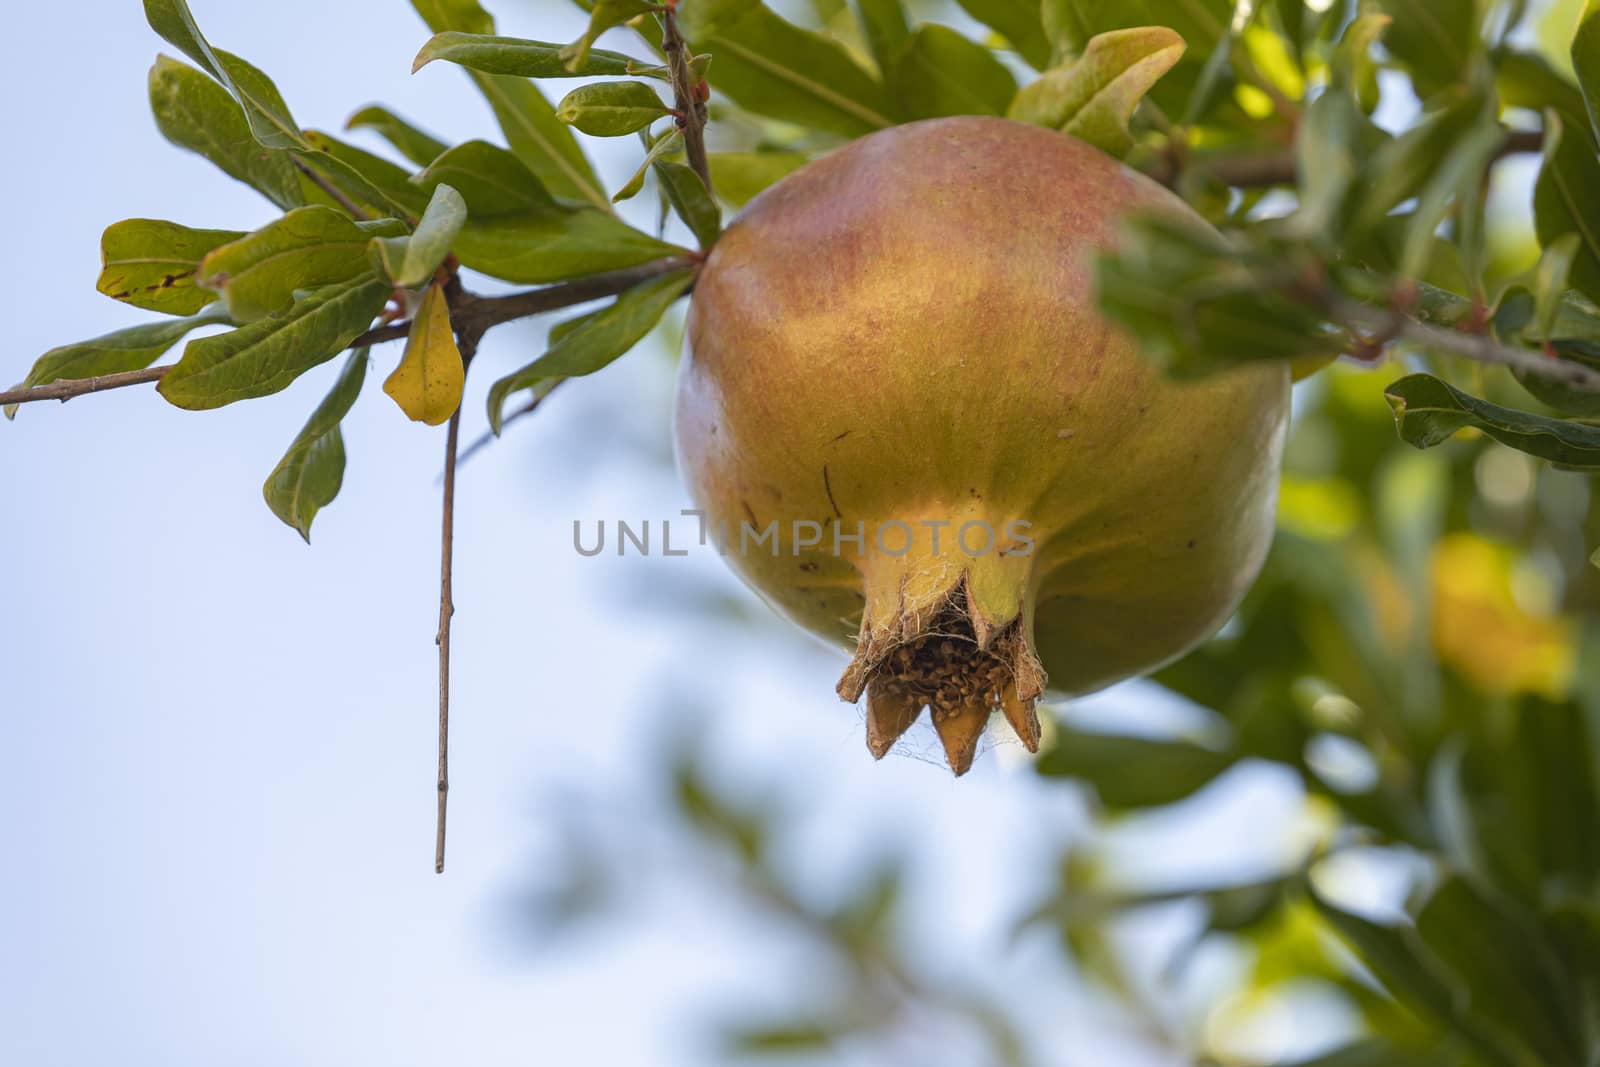 A delicious natural ripe pomegranate fruit hangs from the branches of a pomegranate tree, on a late August afternoon, in the small town of Agon, Zaragoza province.